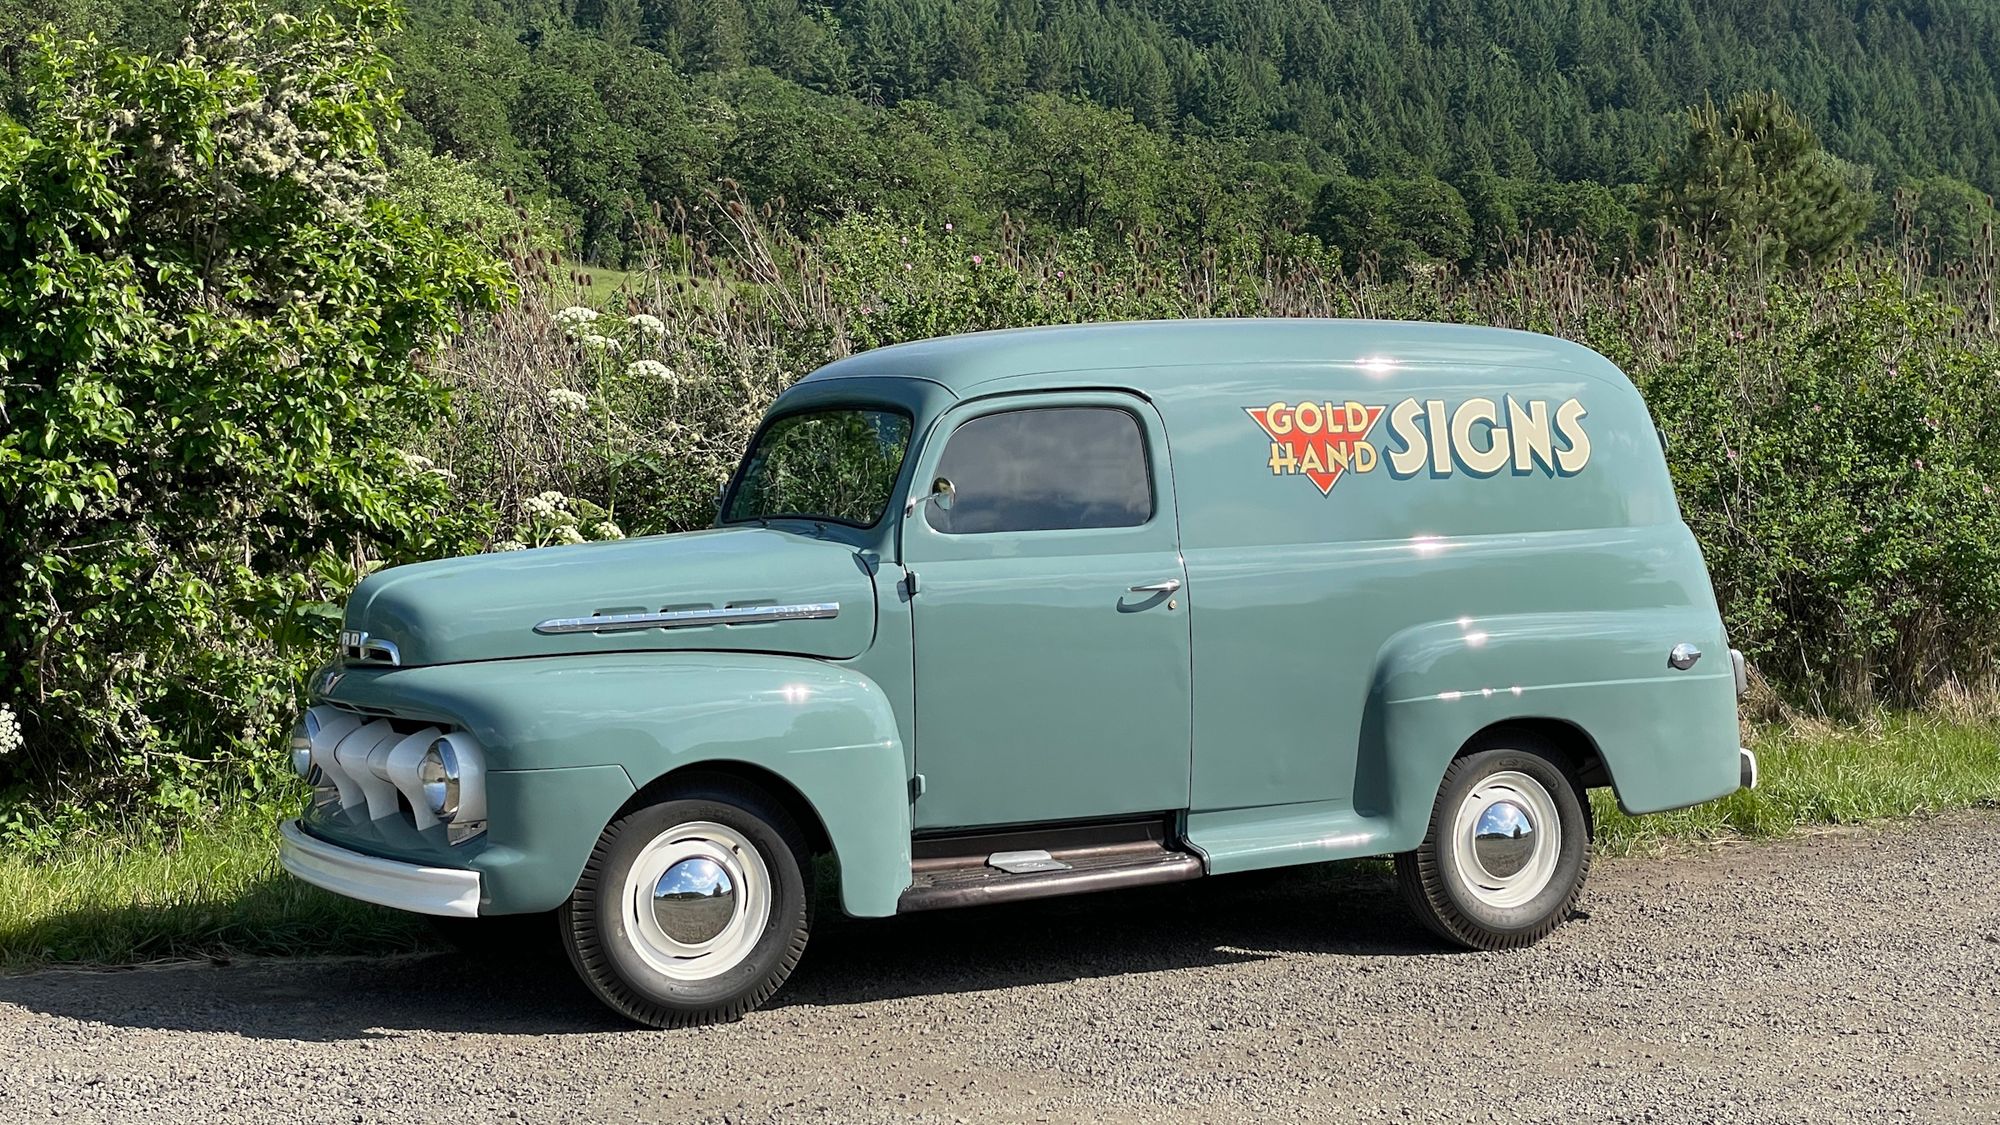 1951 Ford Panel Truck with 'Gold Hand Signs' painted and gilded on the side.